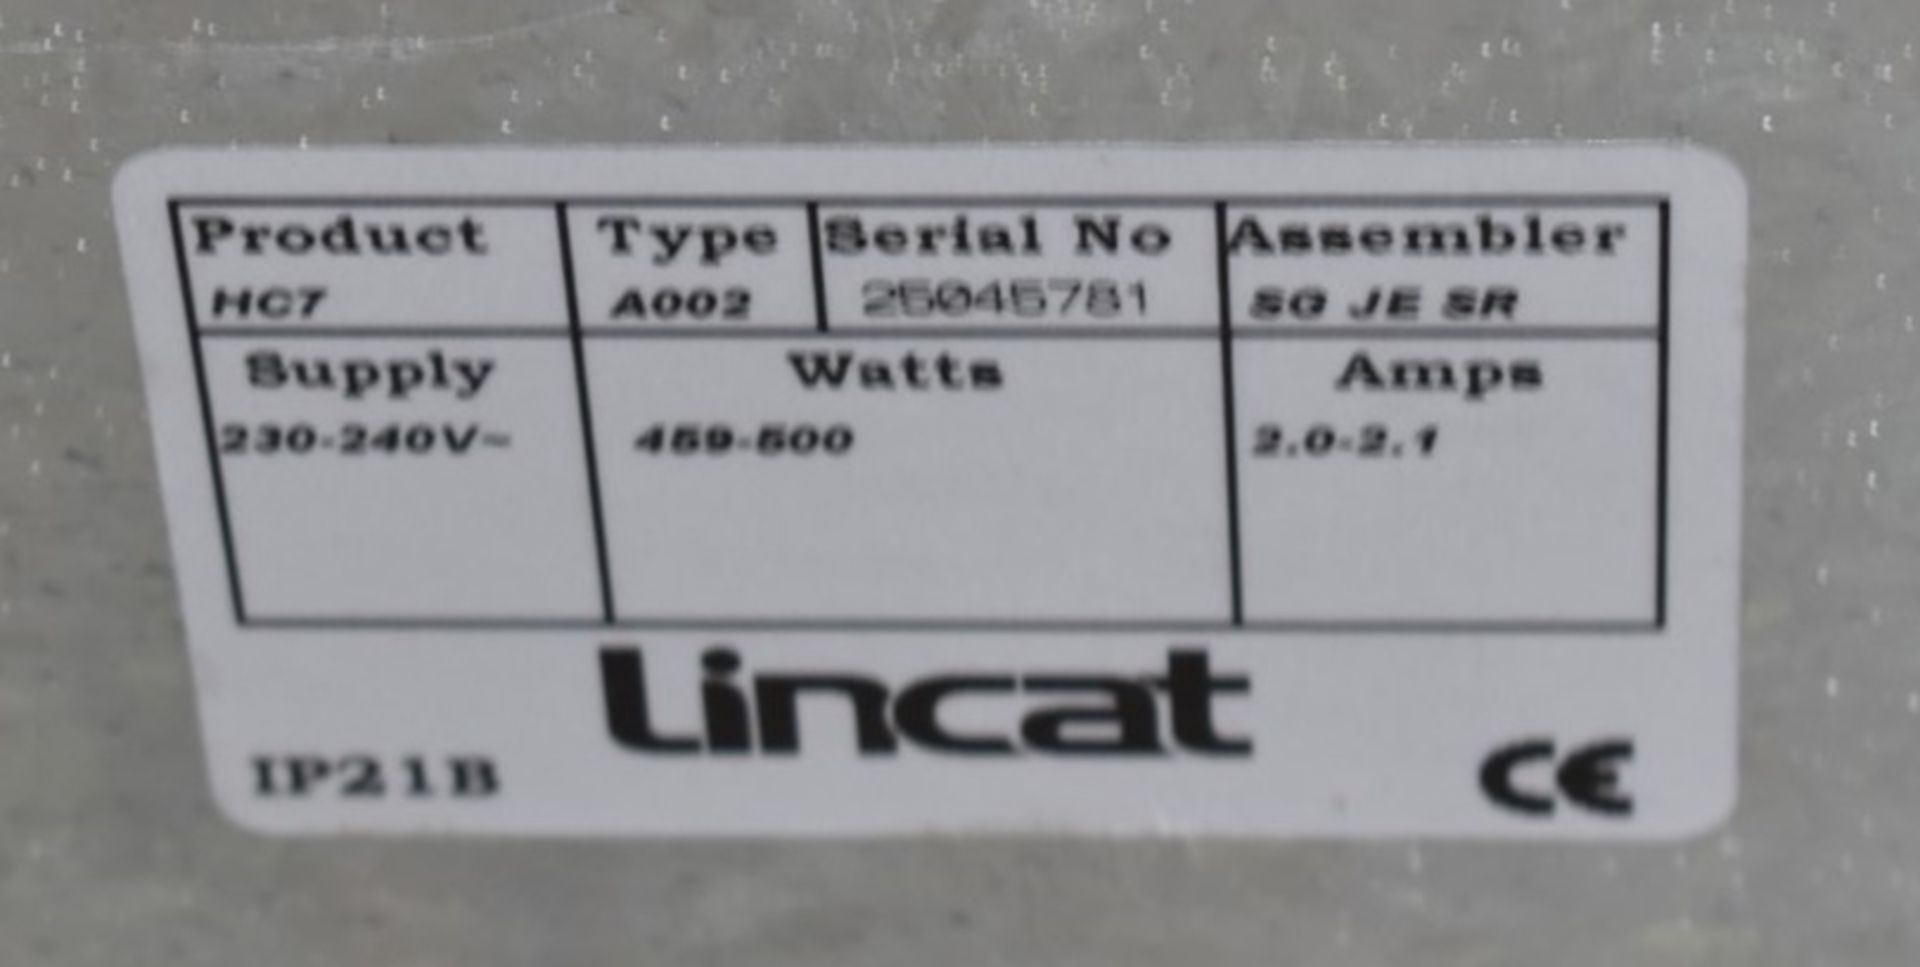 1 x Lincat HC7 Silverlink Stainless Steel Heated Base Pedestal With Doors For Lincat Silverlink - Image 5 of 8